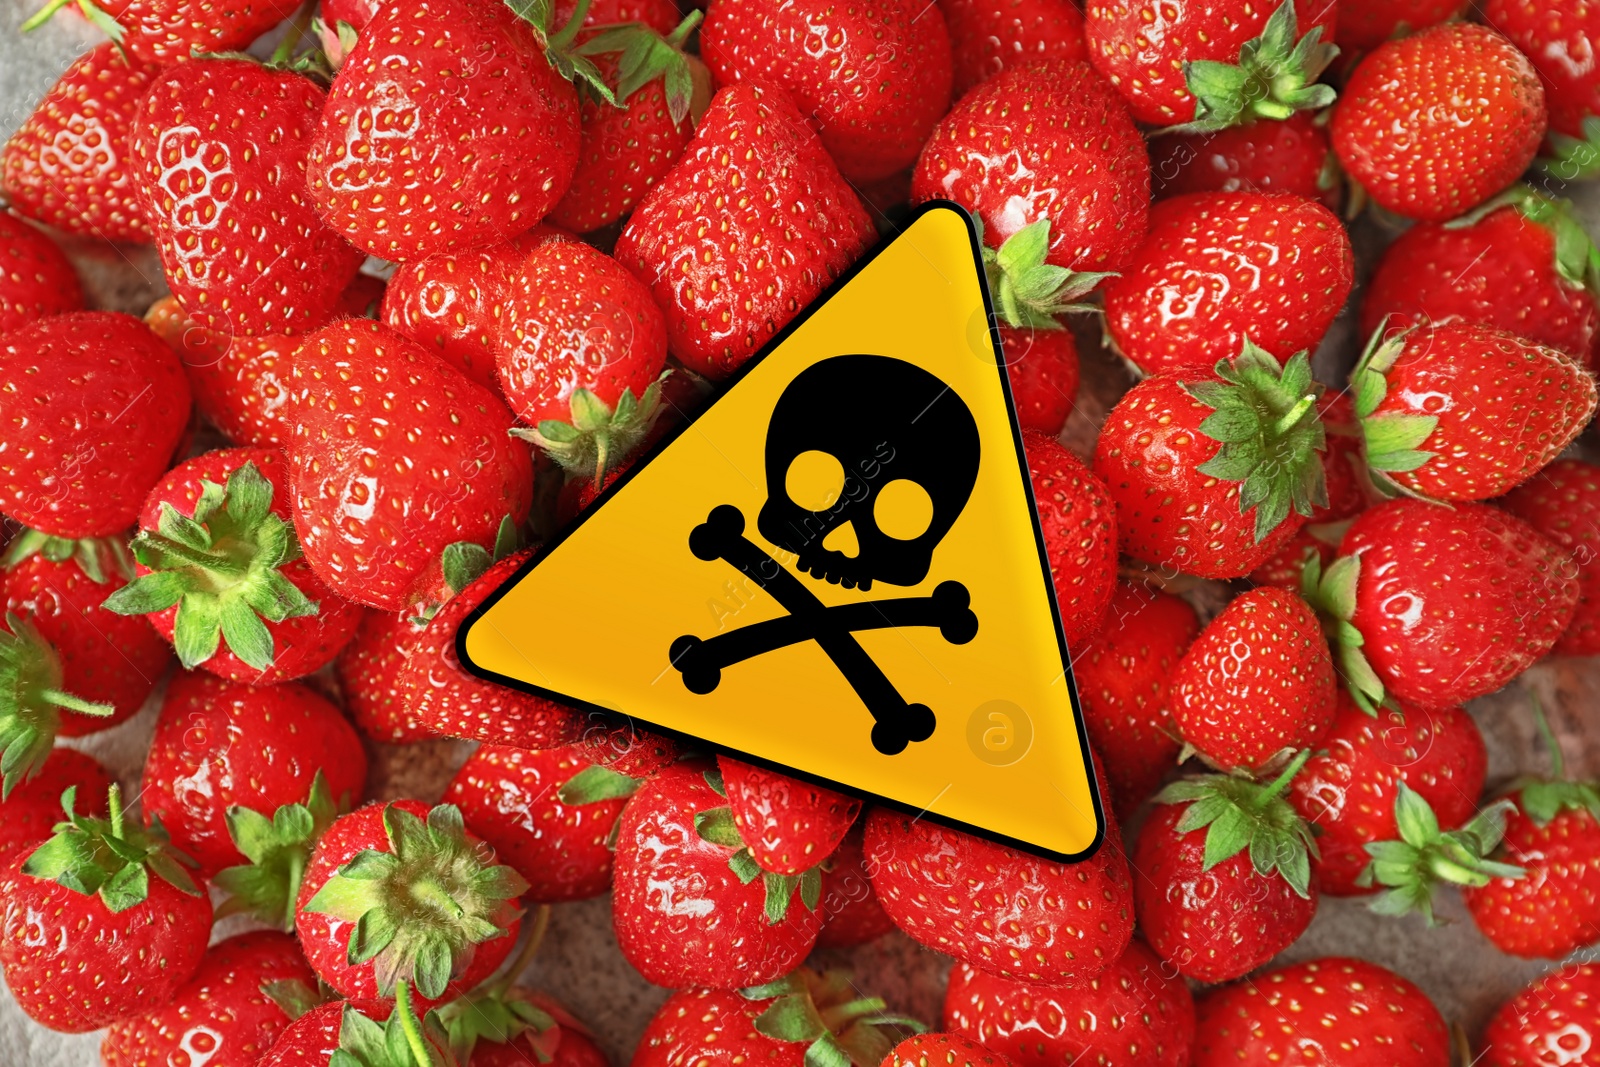 Image of Skull and crossbones sign on ripe strawberries, top view. Be careful - toxic